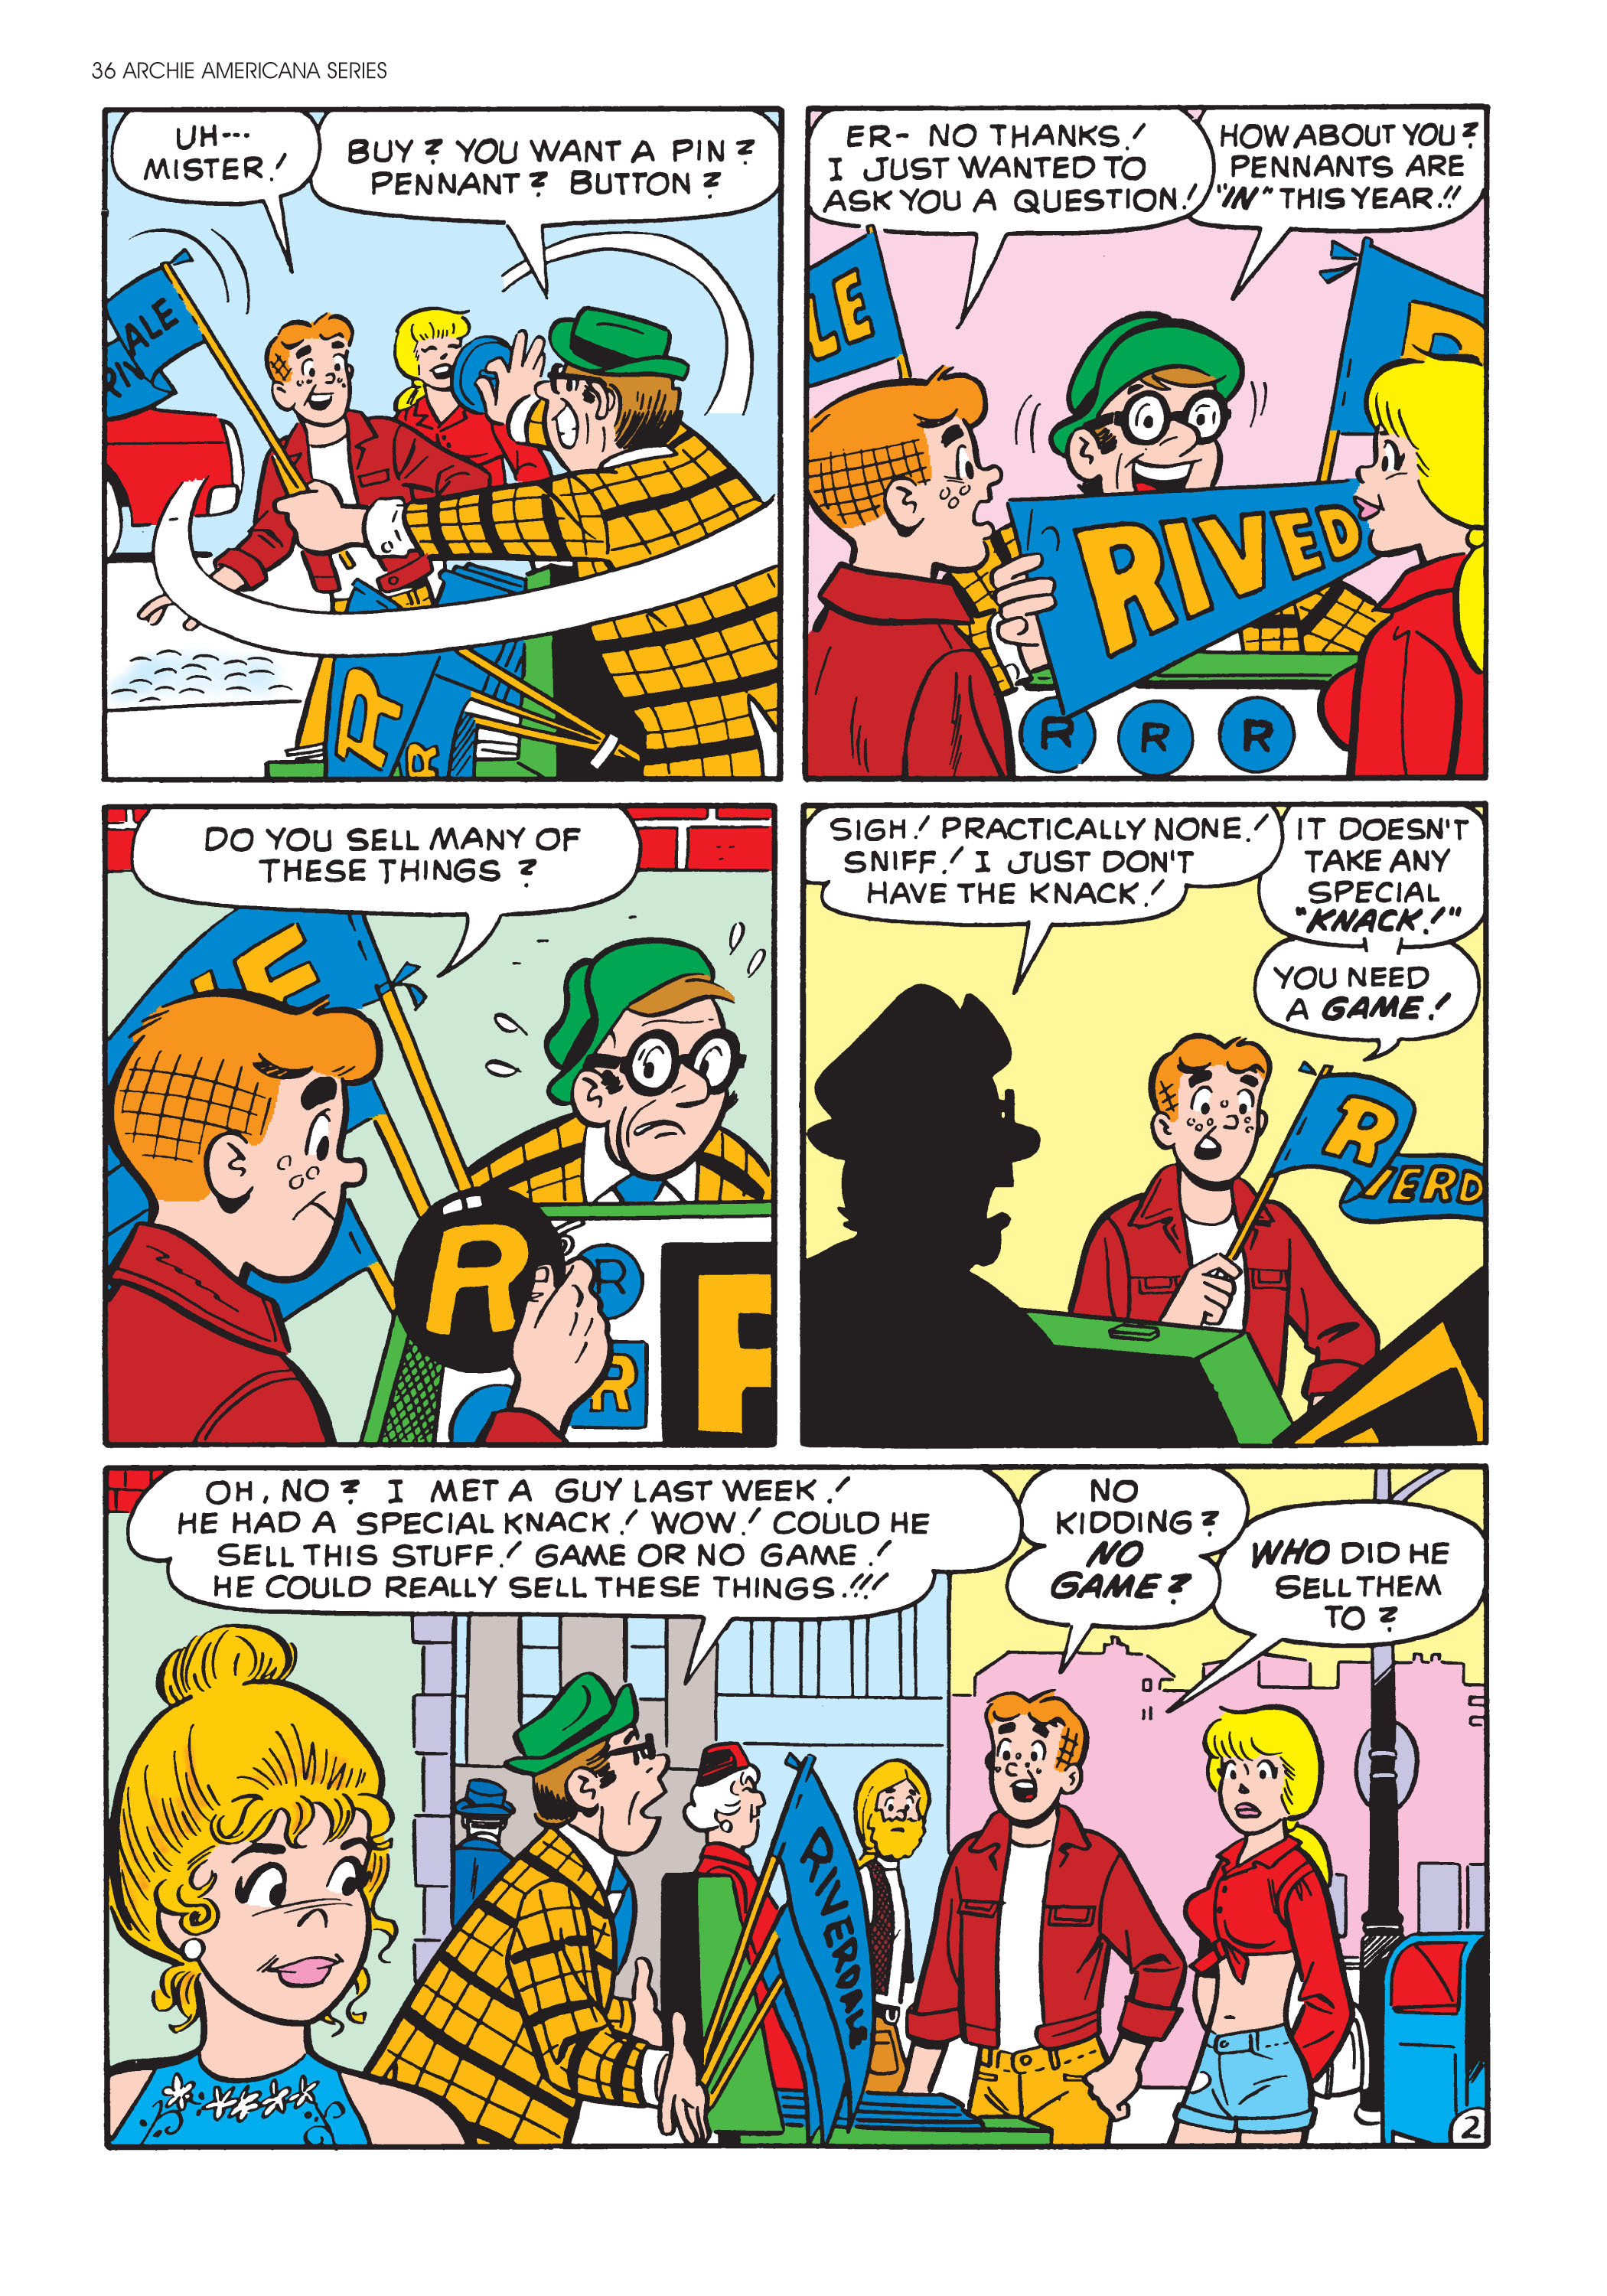 Read online Archie Americana Series comic -  Issue # TPB 4 - 38